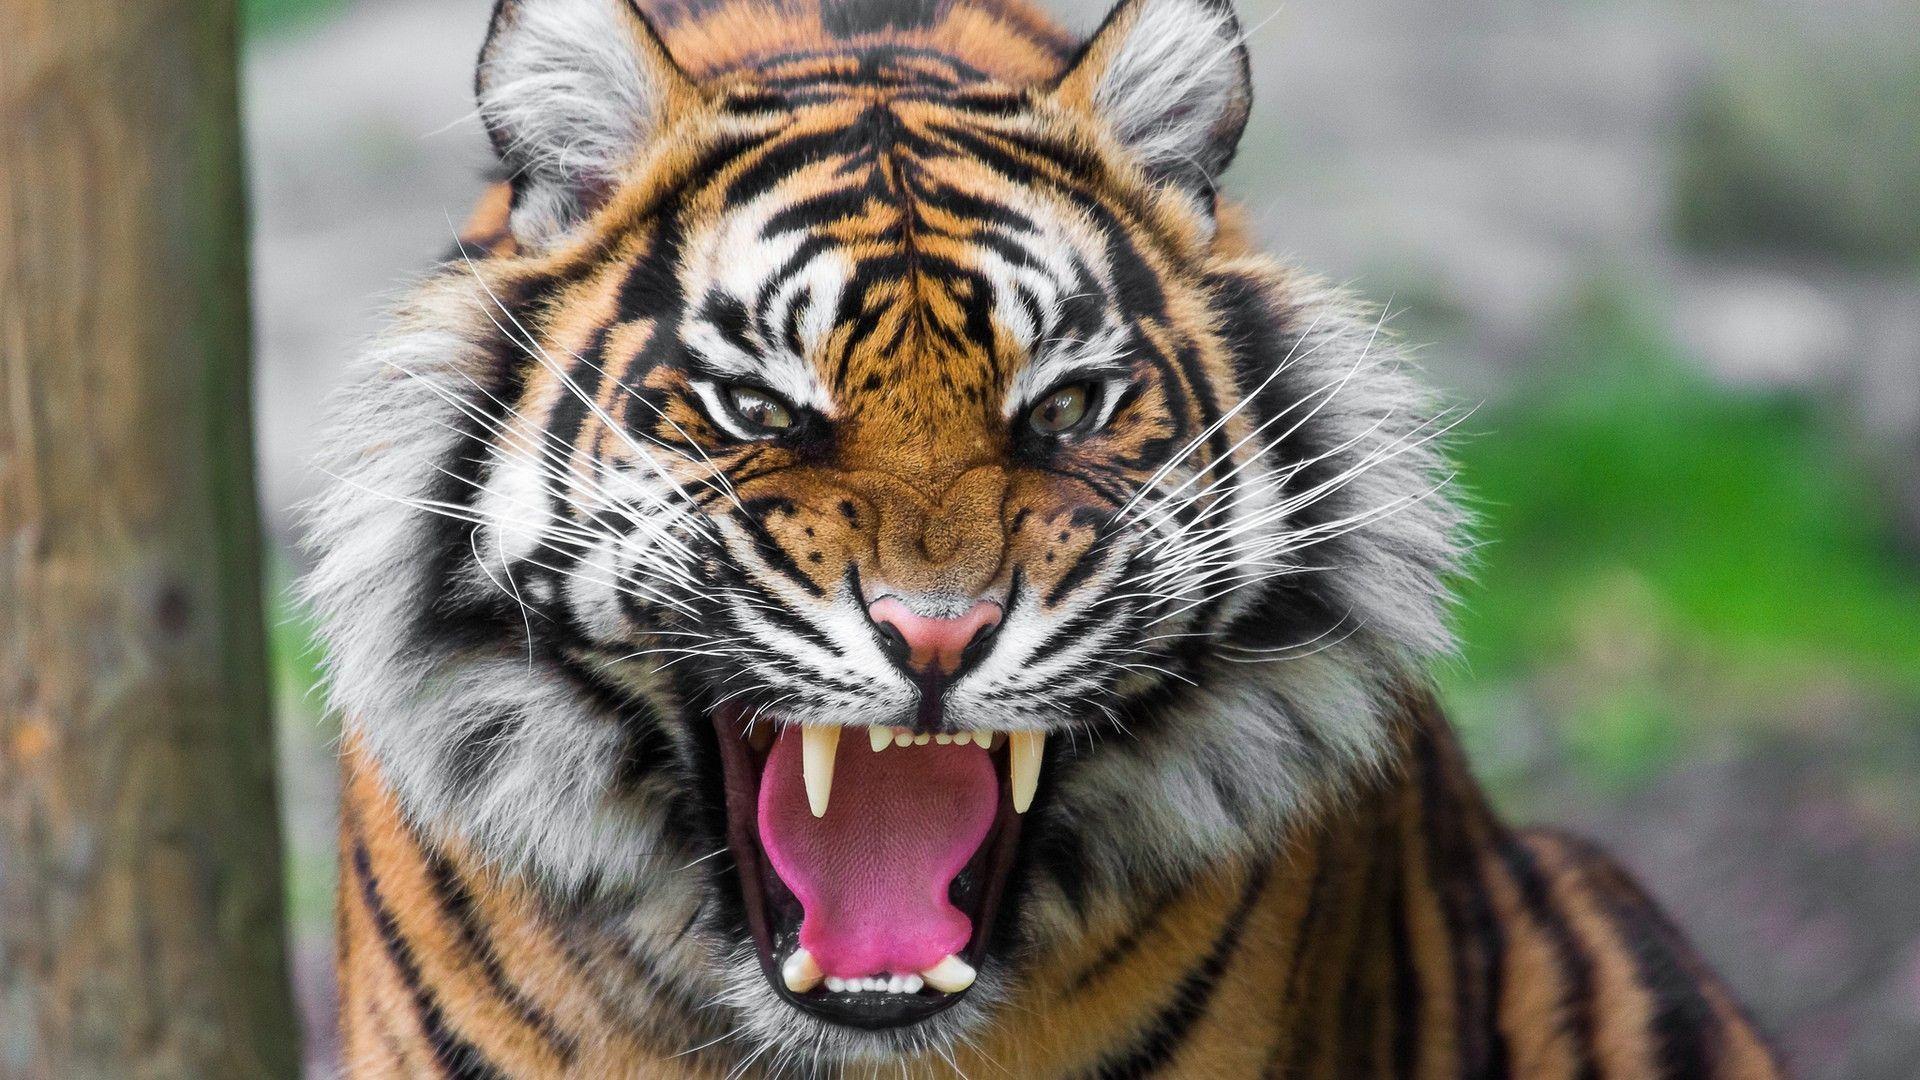 Wallpapers For > Tiger Face Wallpapers Hd